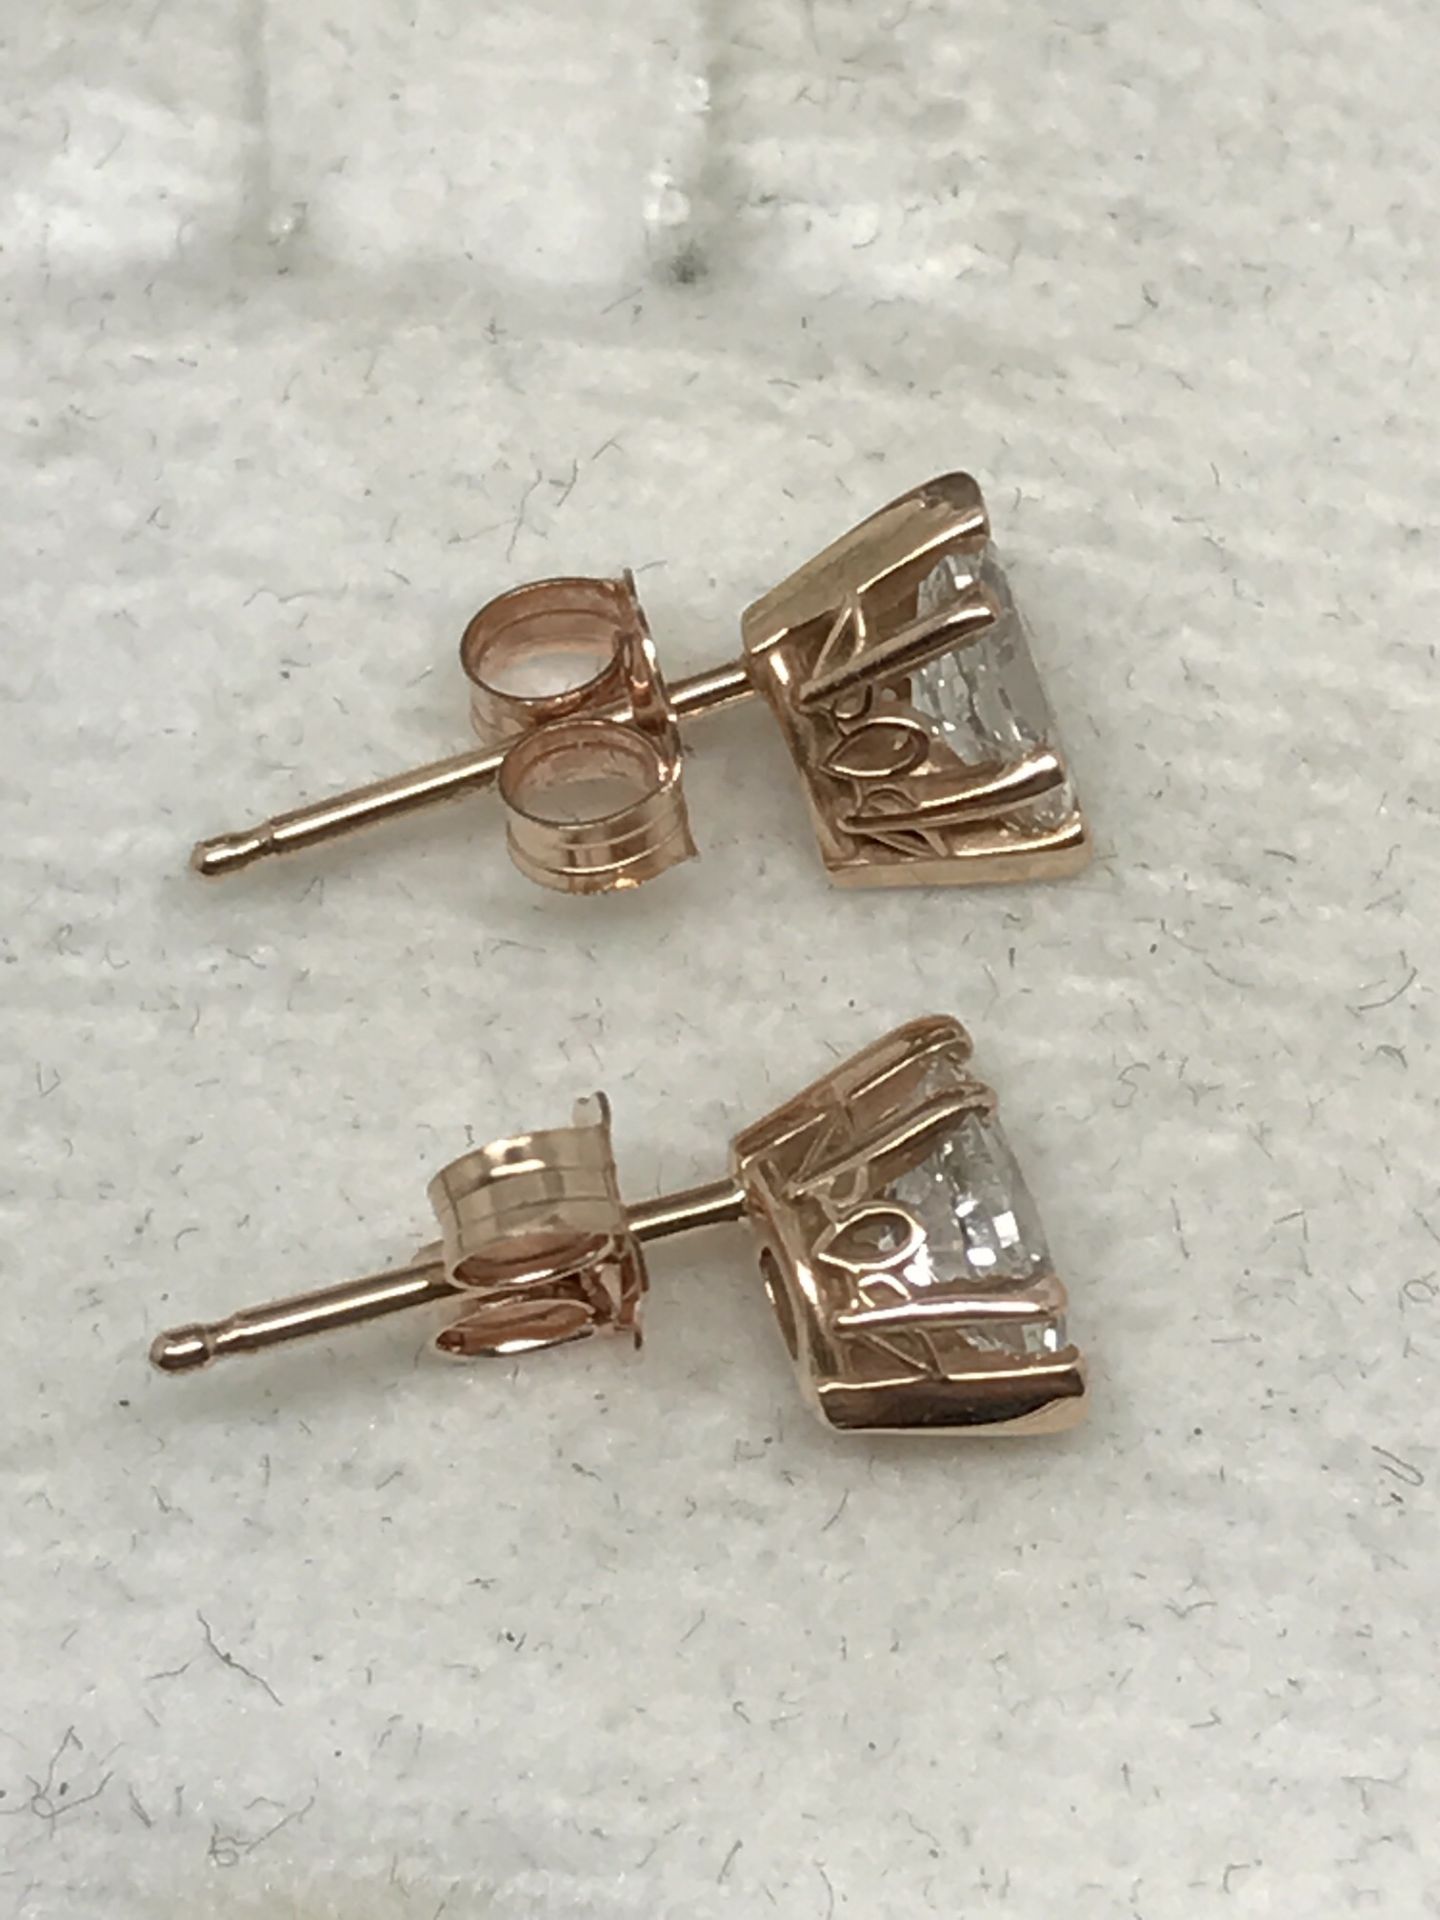 FINE MARQUISE CUT DIAMOND SOLITAIRE EARRINGS SET IN 14k ROSE GOLD - Image 3 of 5